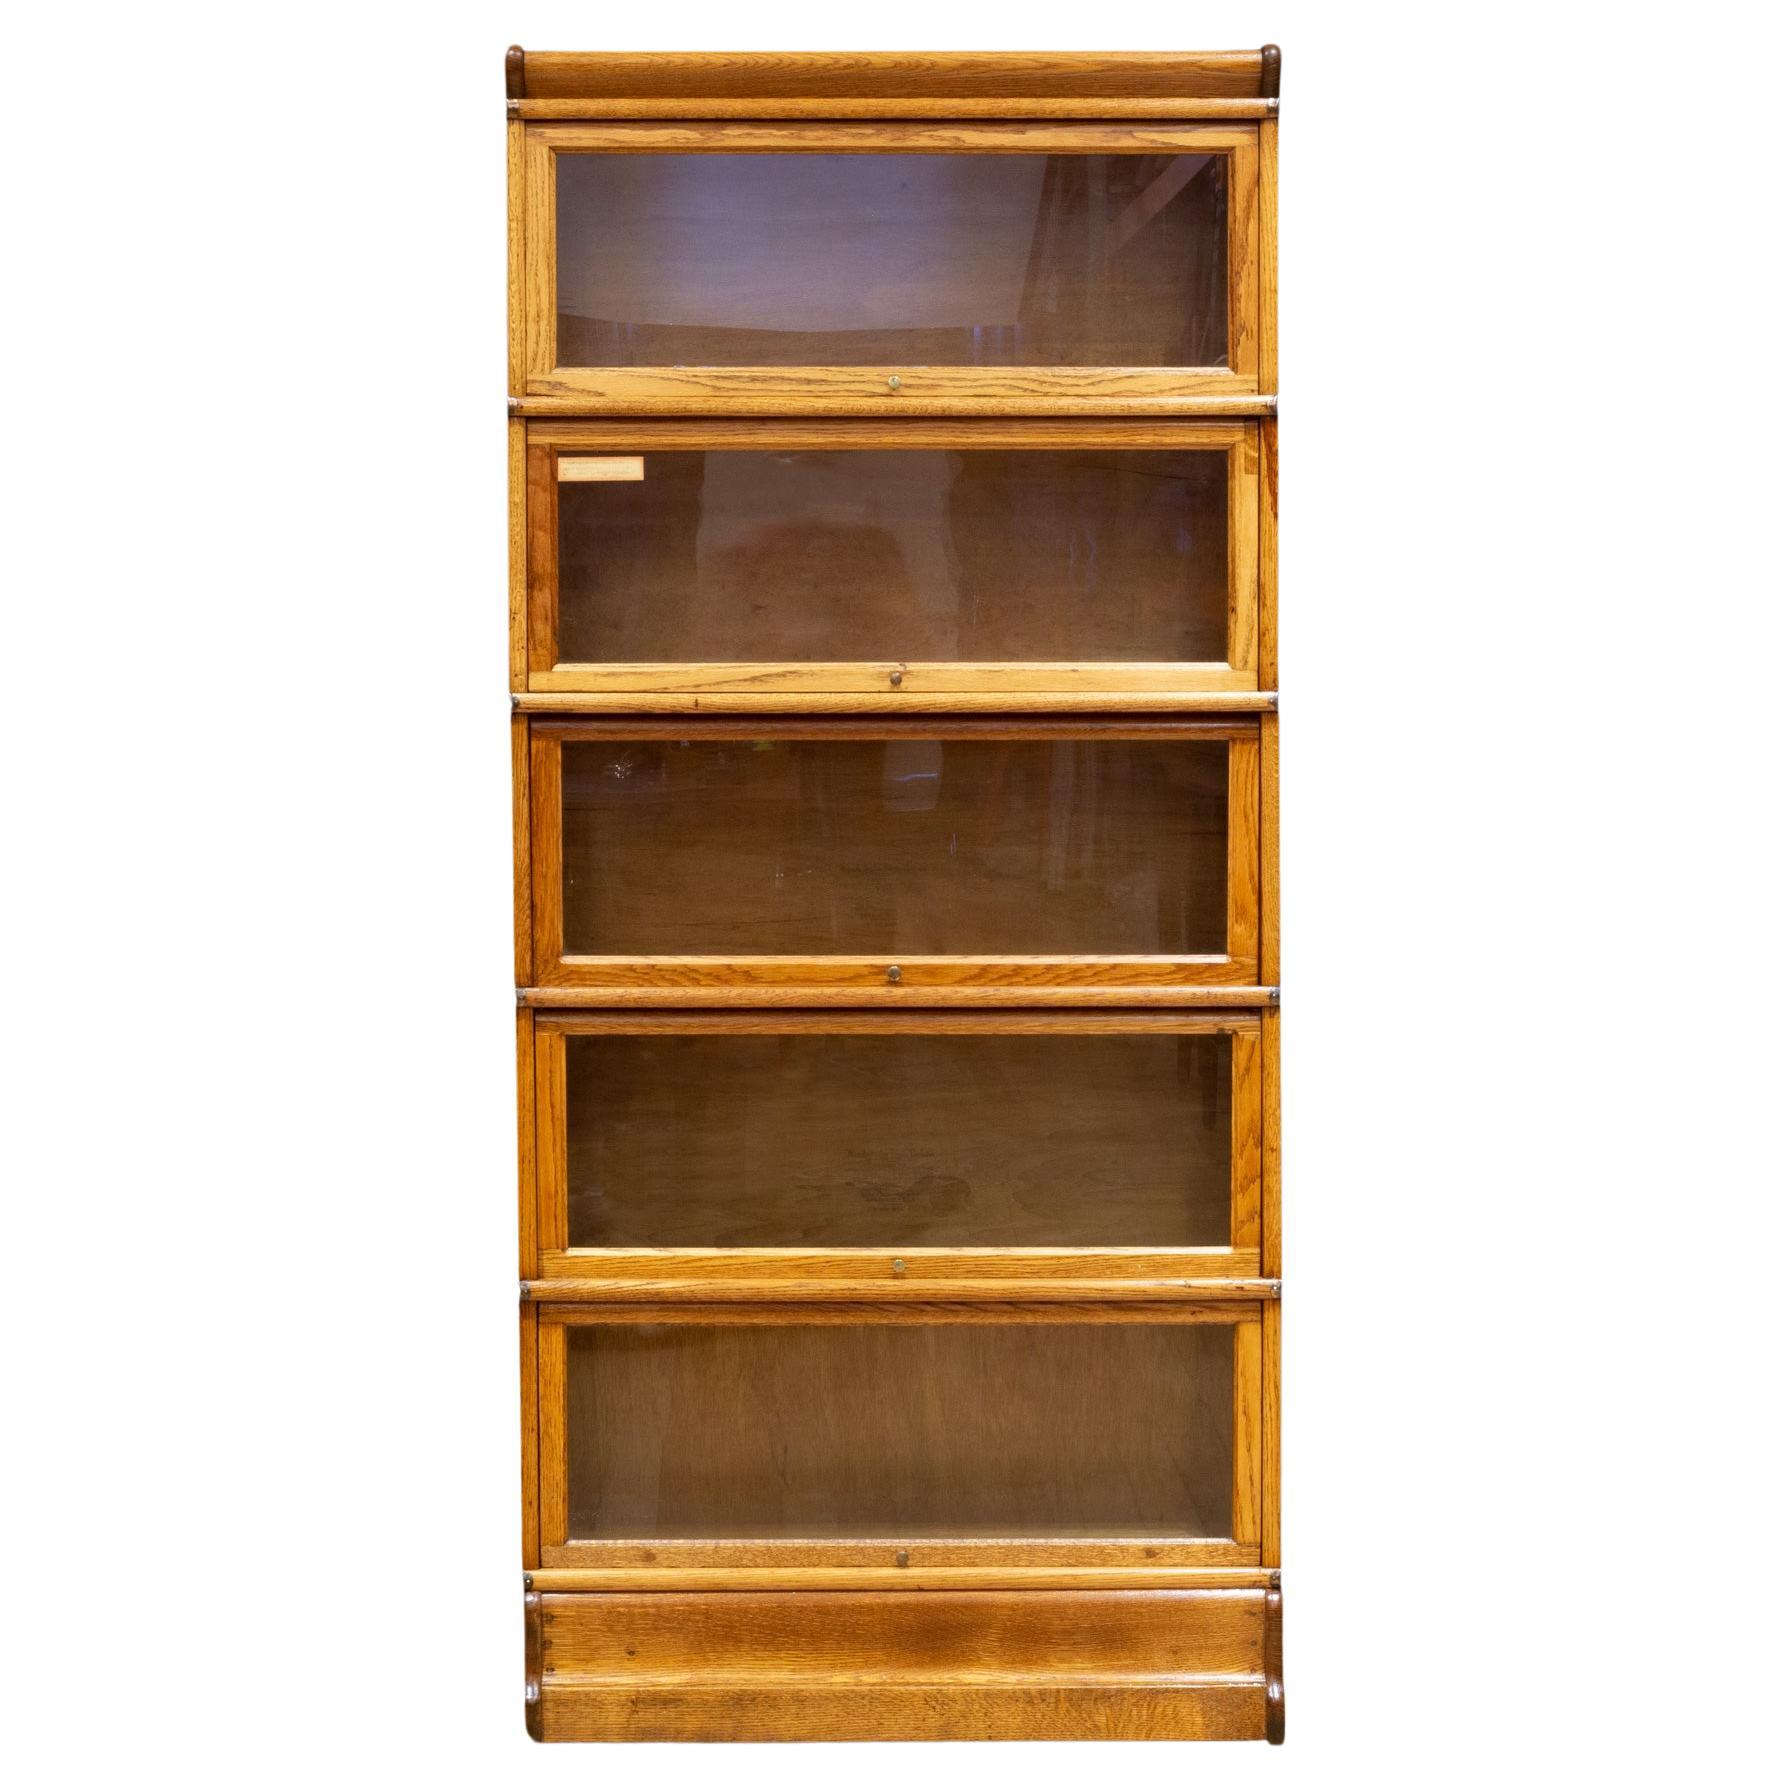 Early 20th c. Globe-Wernicke 5 Stack Lawyer's Bookcase c.1900-1910 For Sale